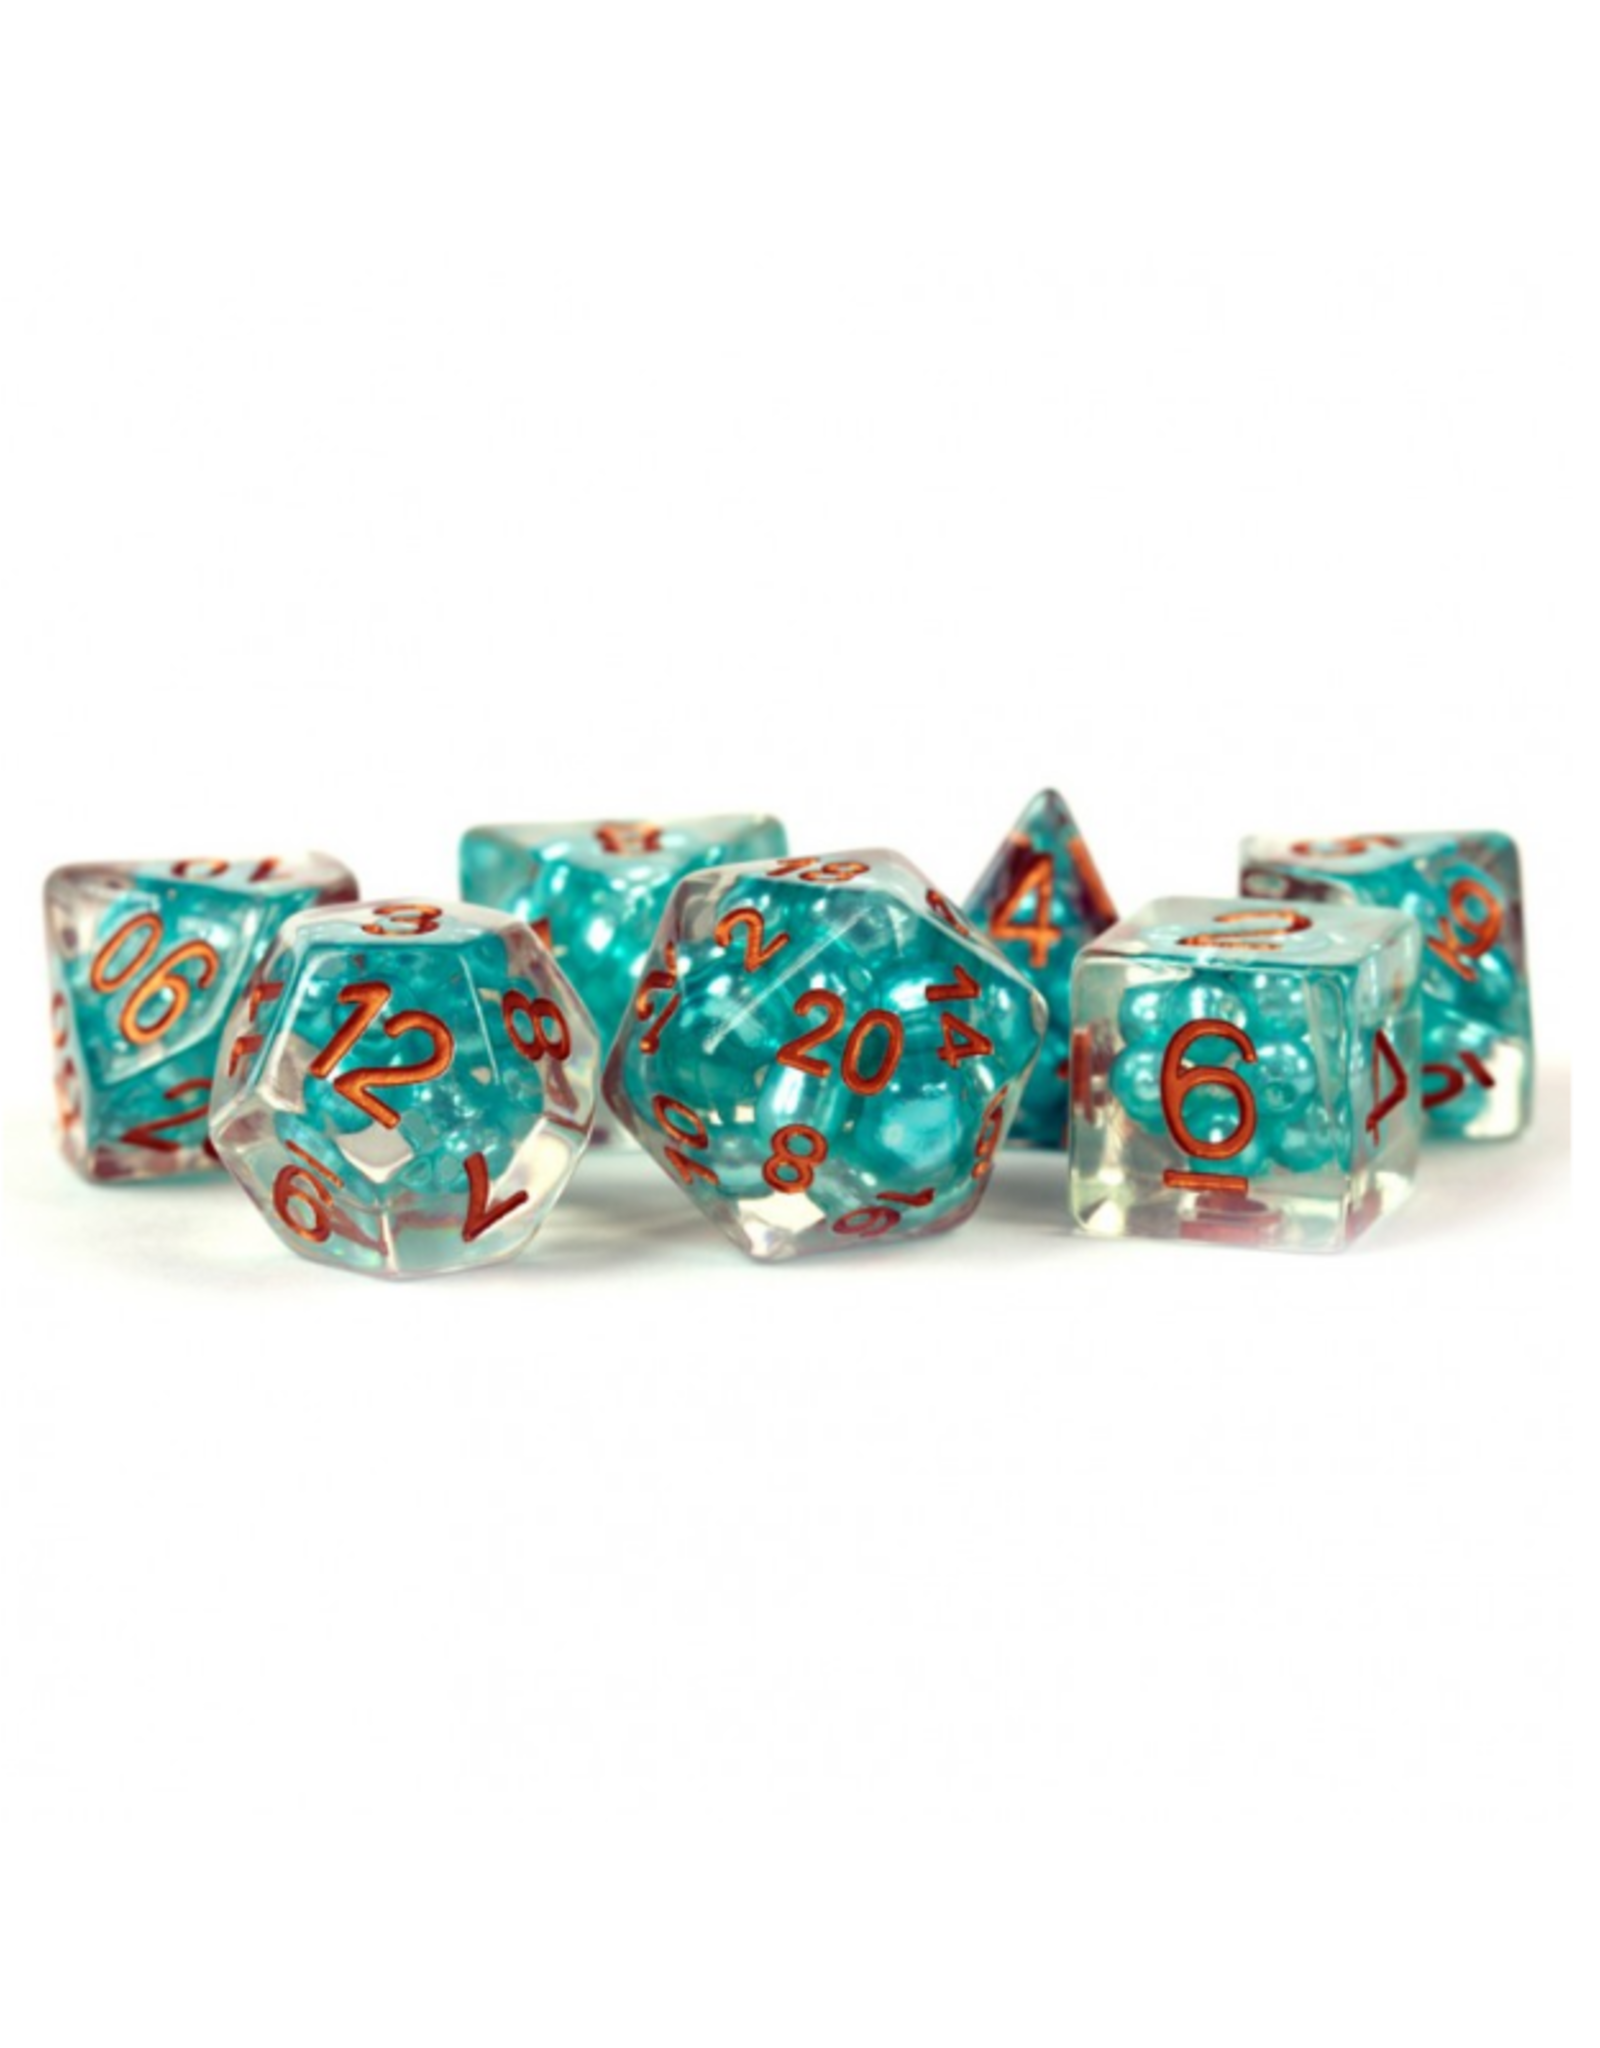 Polyhedral Dice Set: Resin Pearl - Teal w/Copper